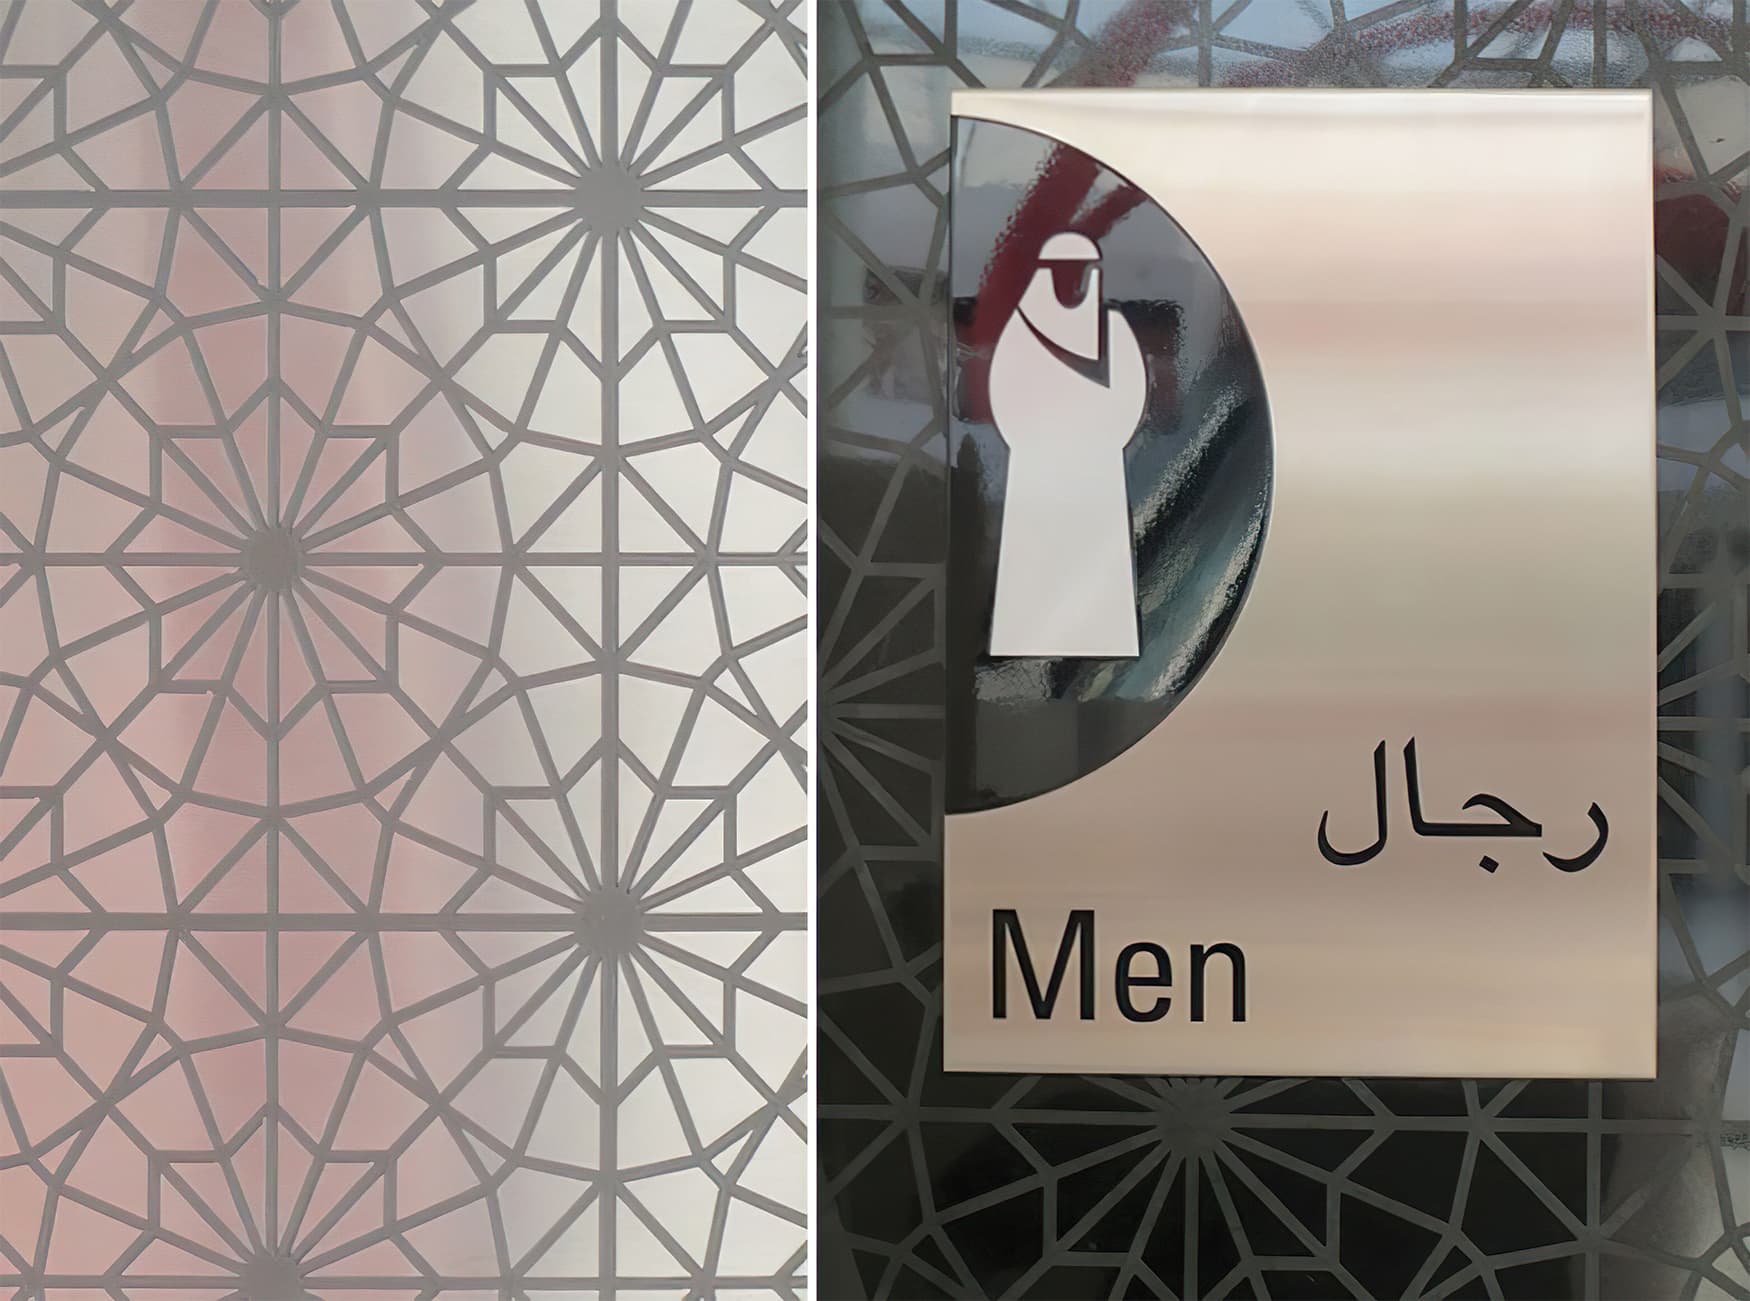 Ferrari World in Abu Dhabi in the United Arab Emirates. Project Pattern and Restroom Plaque